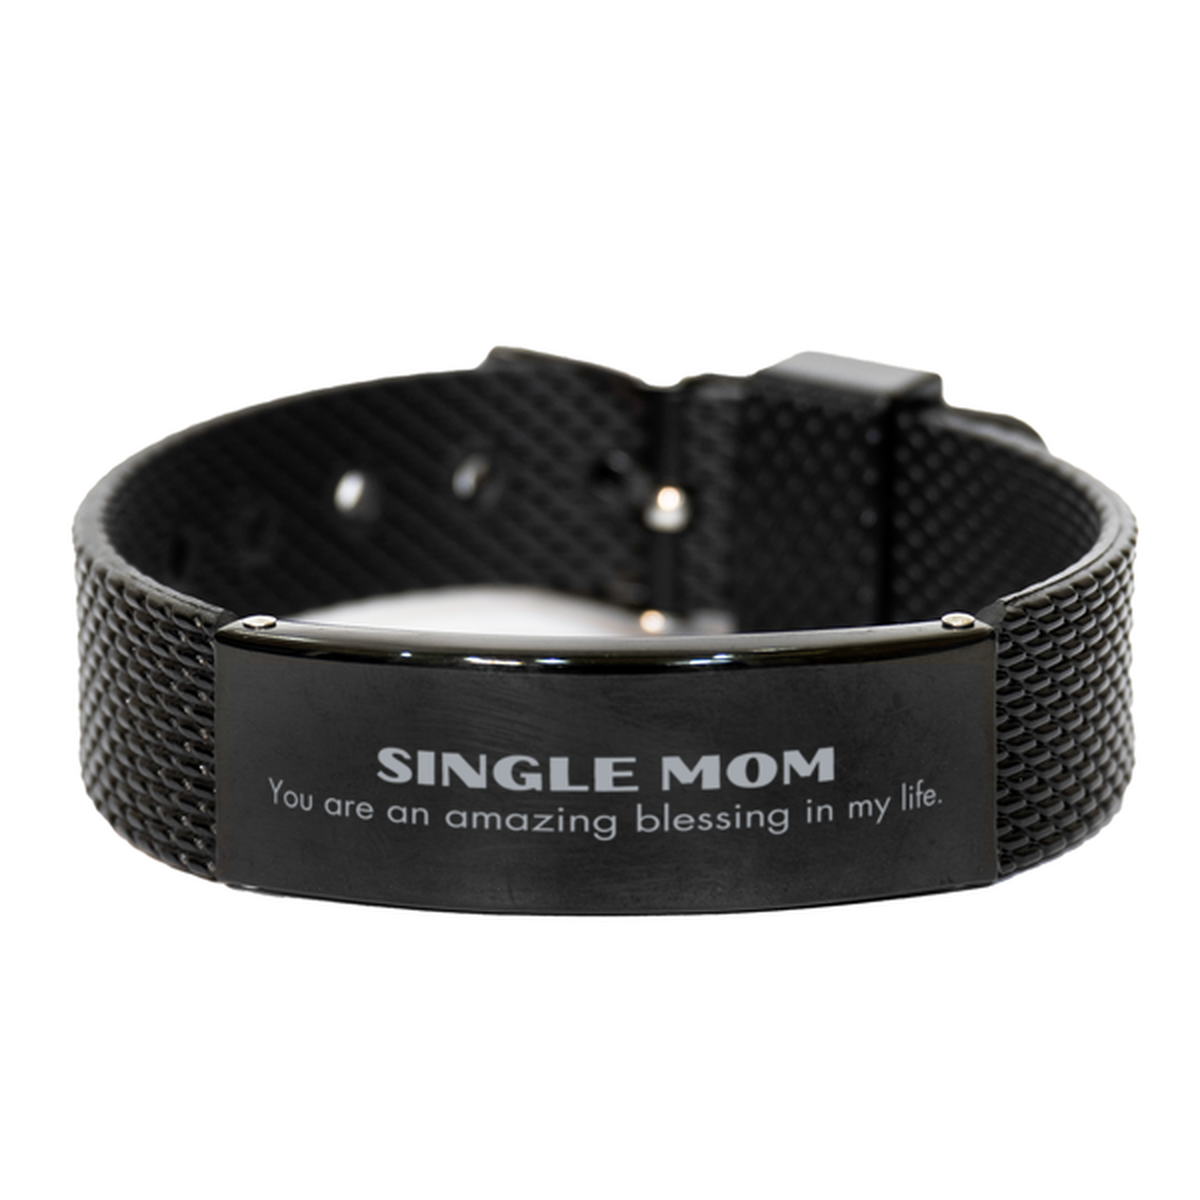 Single Mom Black Shark Mesh Bracelet, You are an amazing blessing in my life, Thank You Gifts For Single Mom, Inspirational Birthday Christmas Unique Gifts For Single Mom